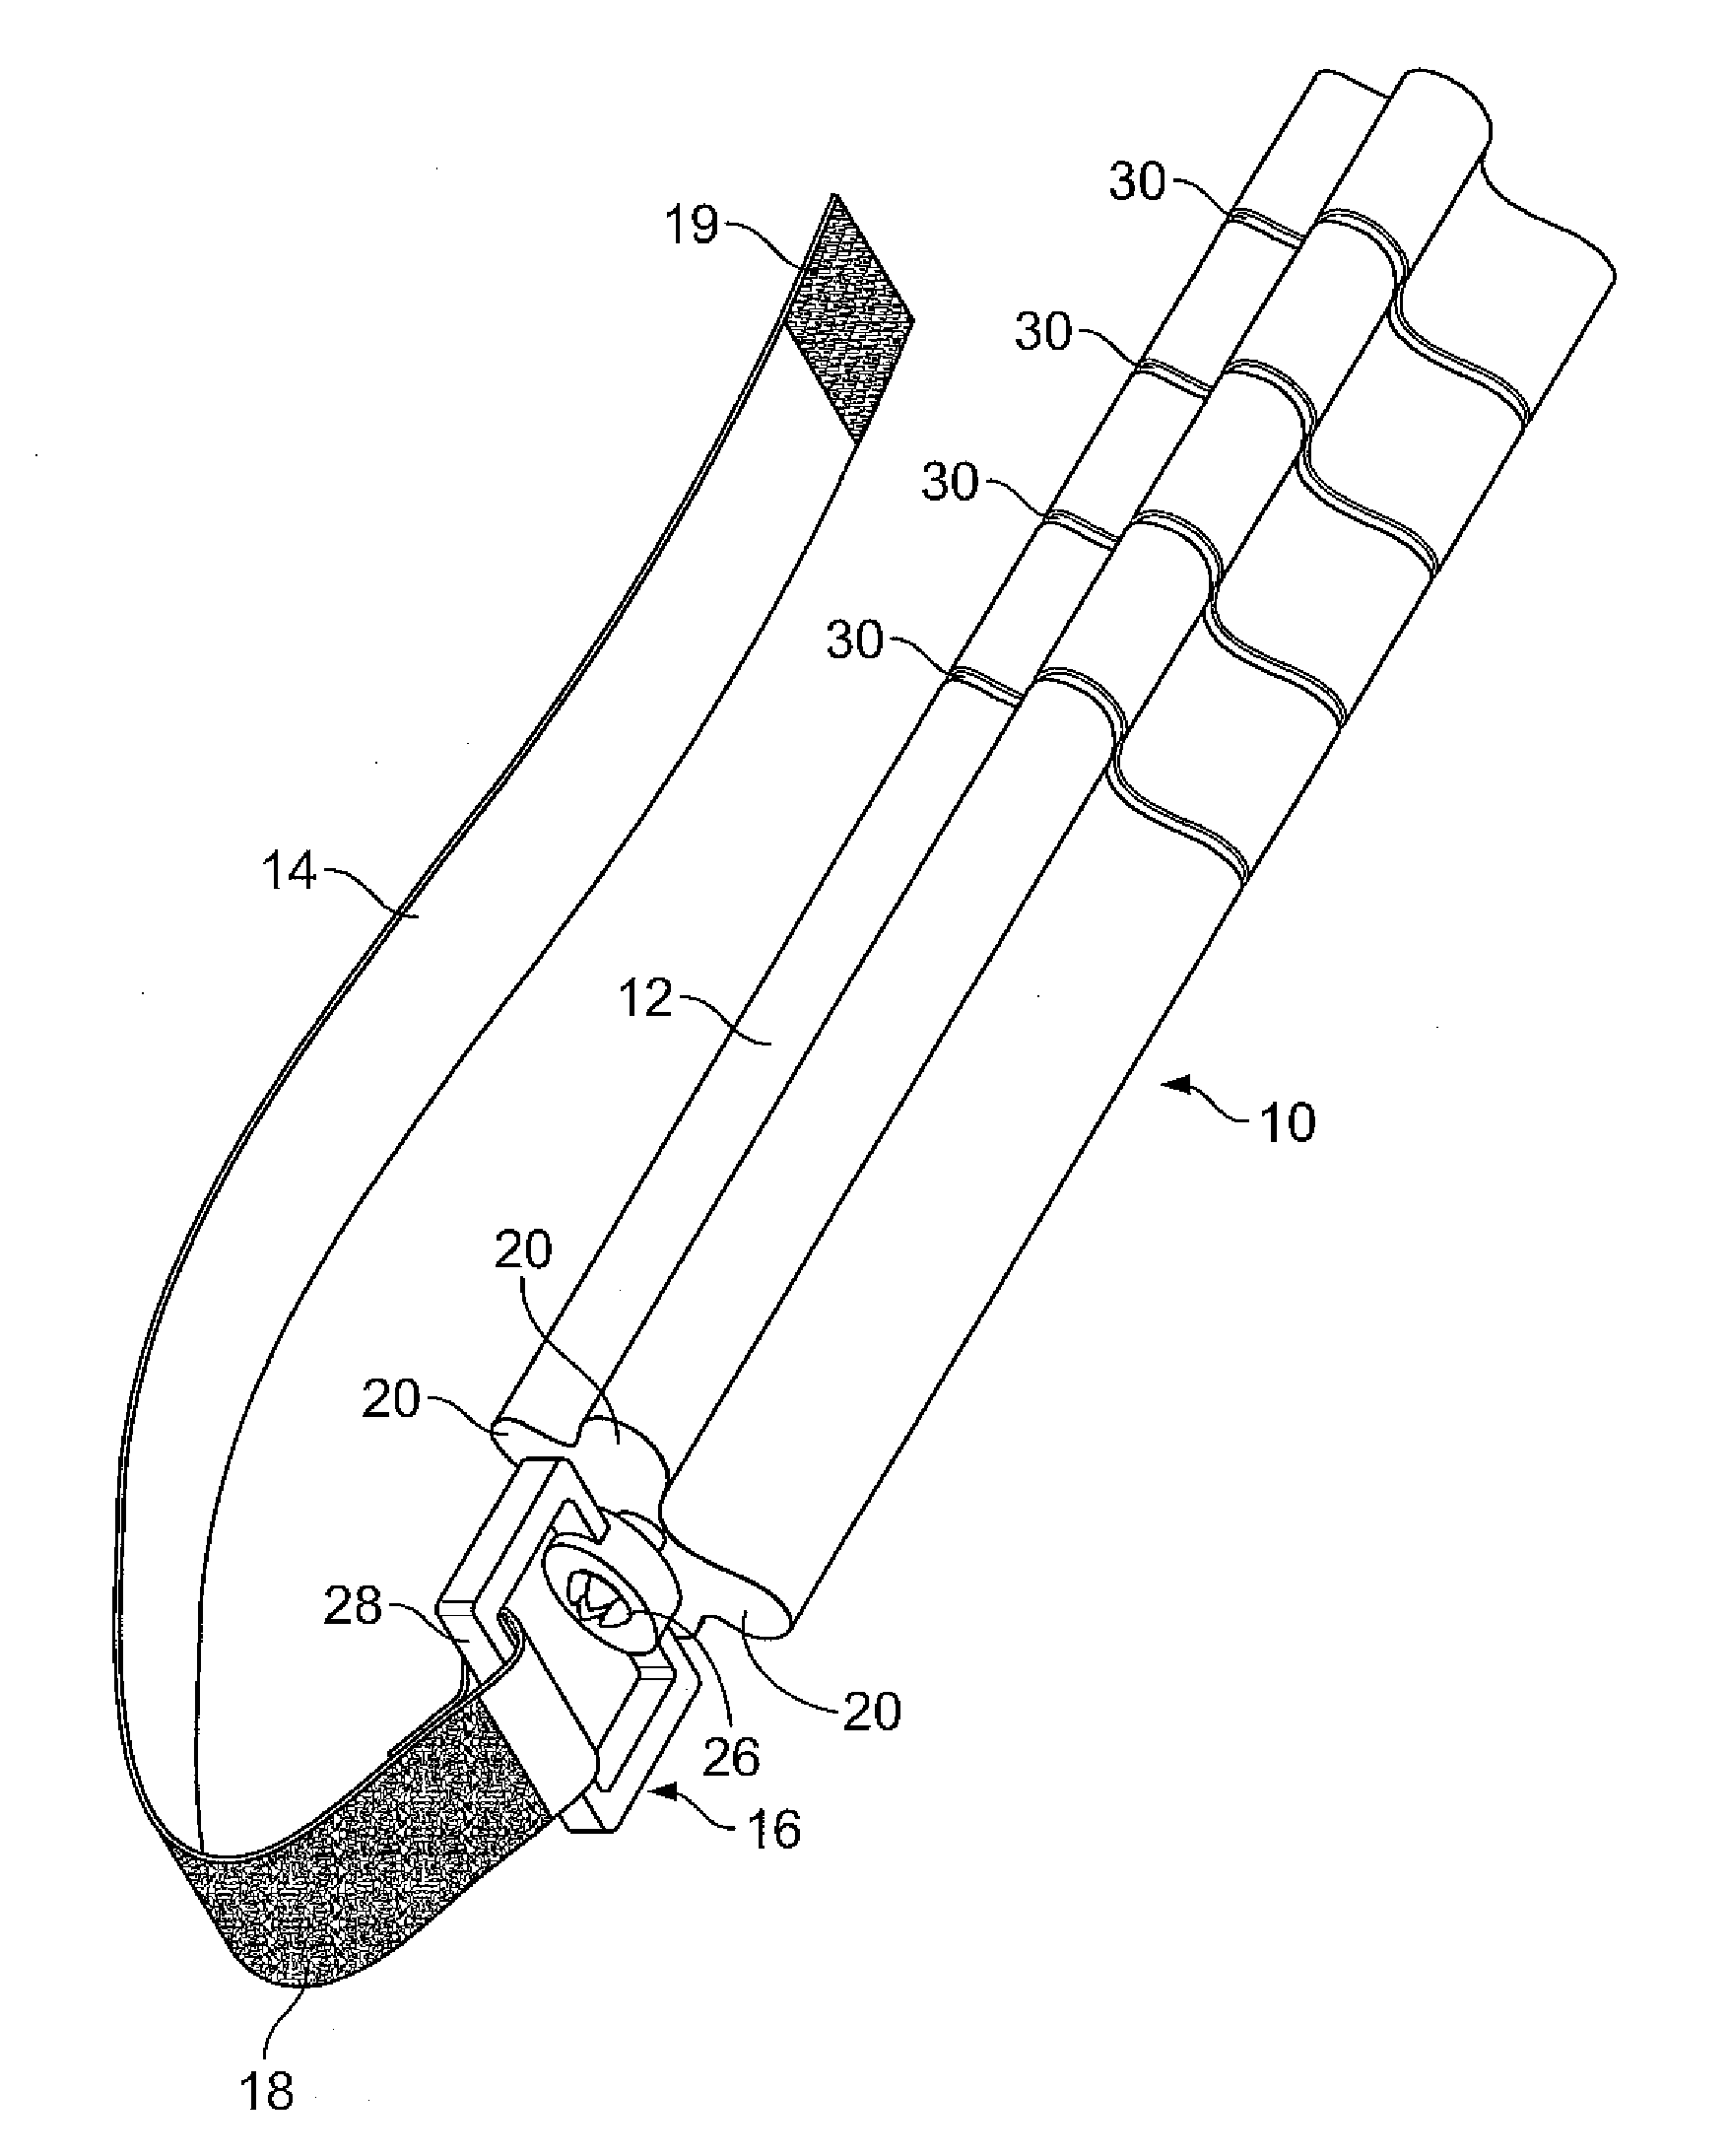 Apparatus for holding open the mouth of an animal with its jaws in a fixed relationship for performing a medical or dental procedure